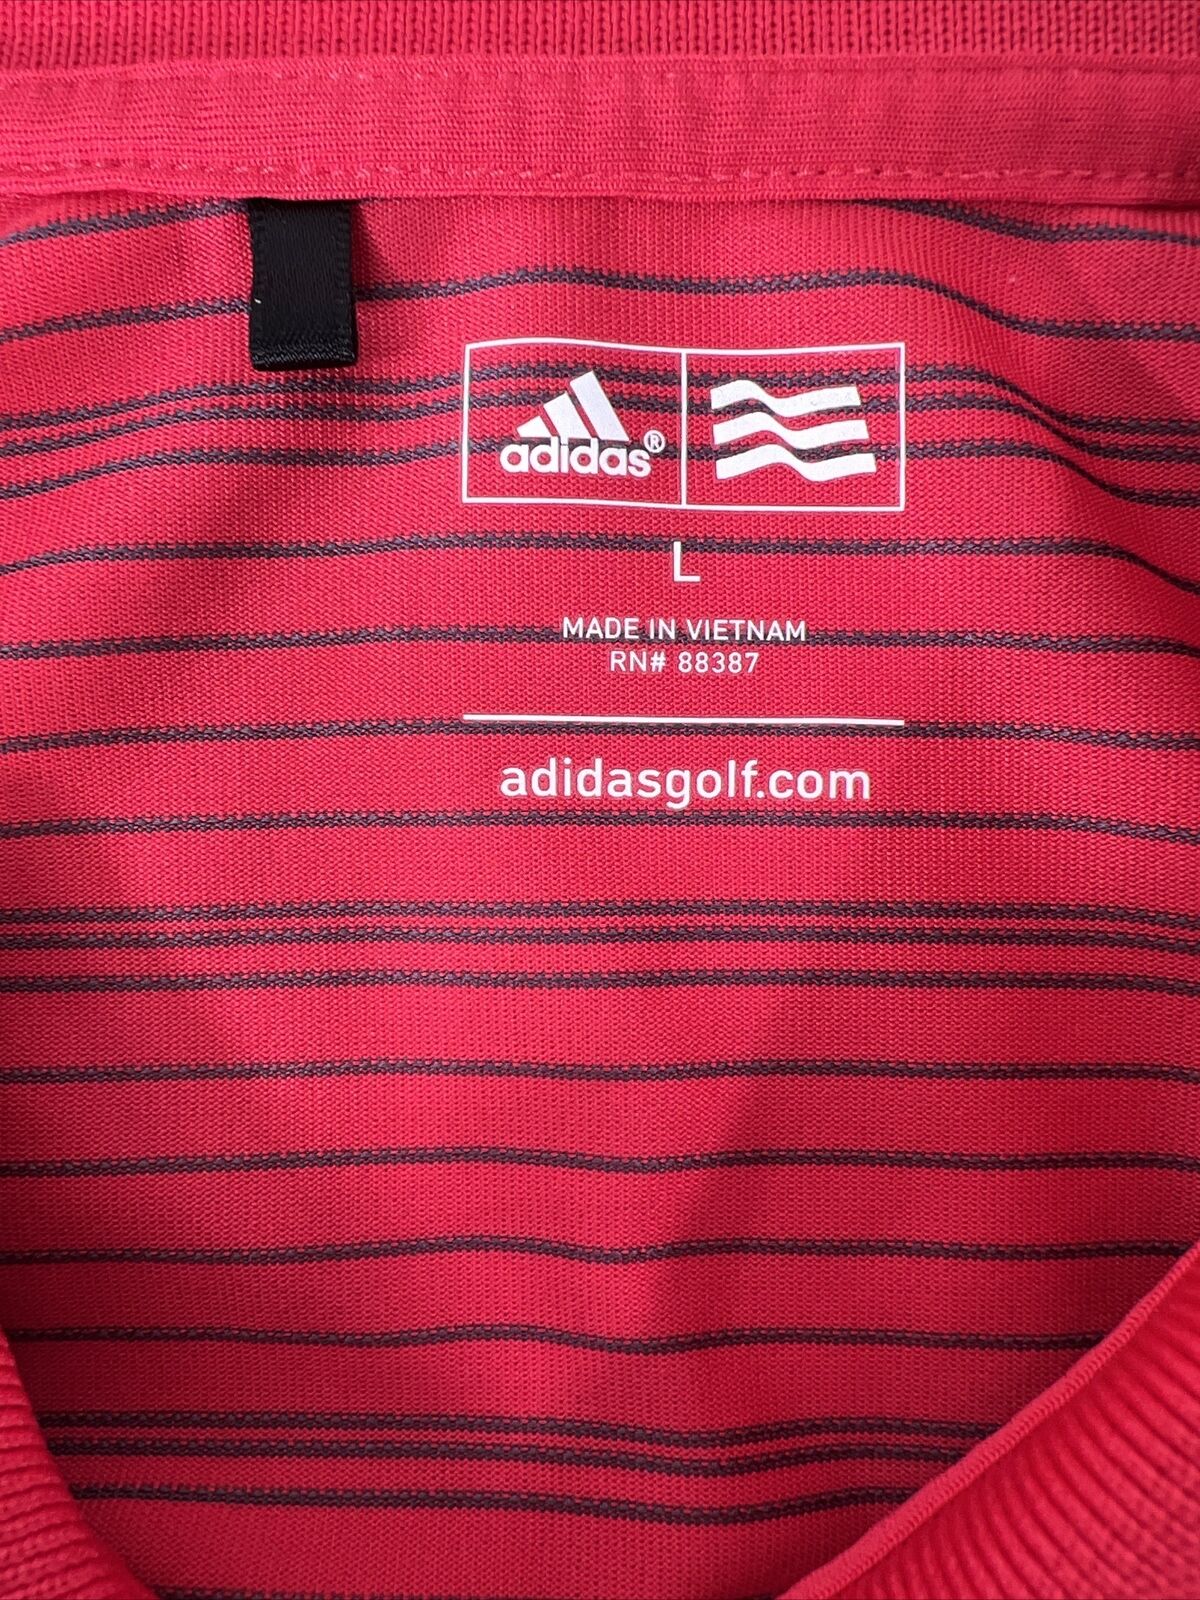 adidas Men's Red Striped Short Sleeve Active Golf Polo Shirt - L